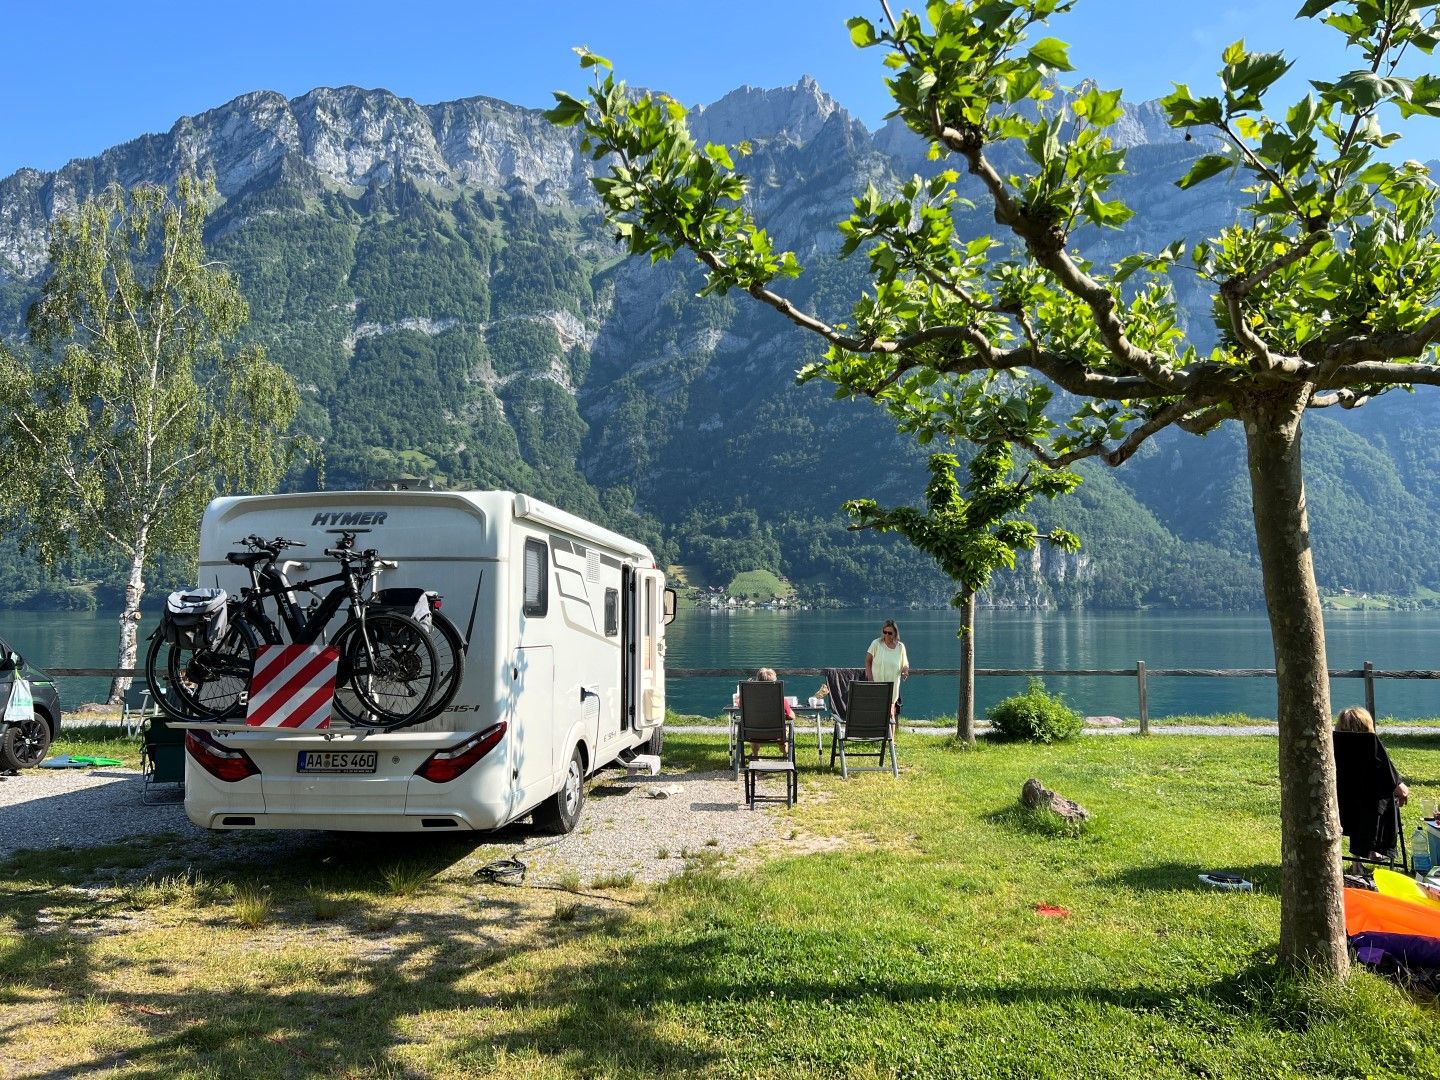 Campsite in Switzerland on Lake Walensee